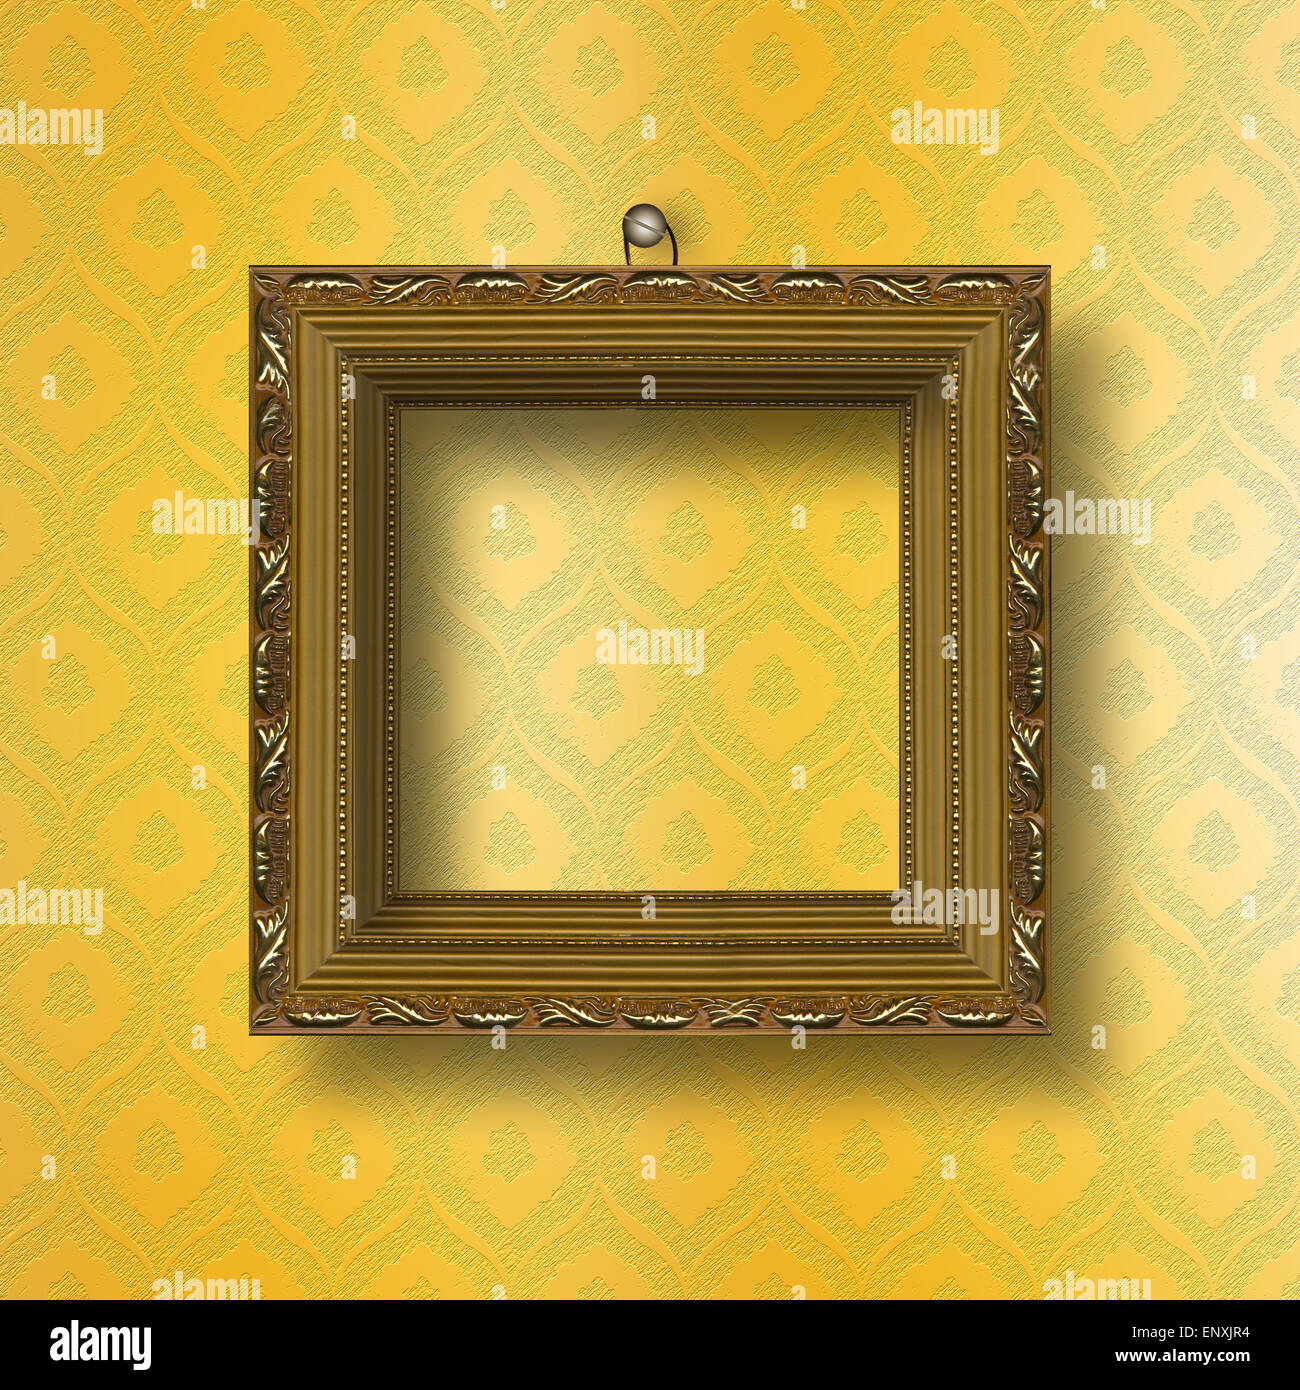 Old wooden frame for photo on the abstract paper background Stock Photo